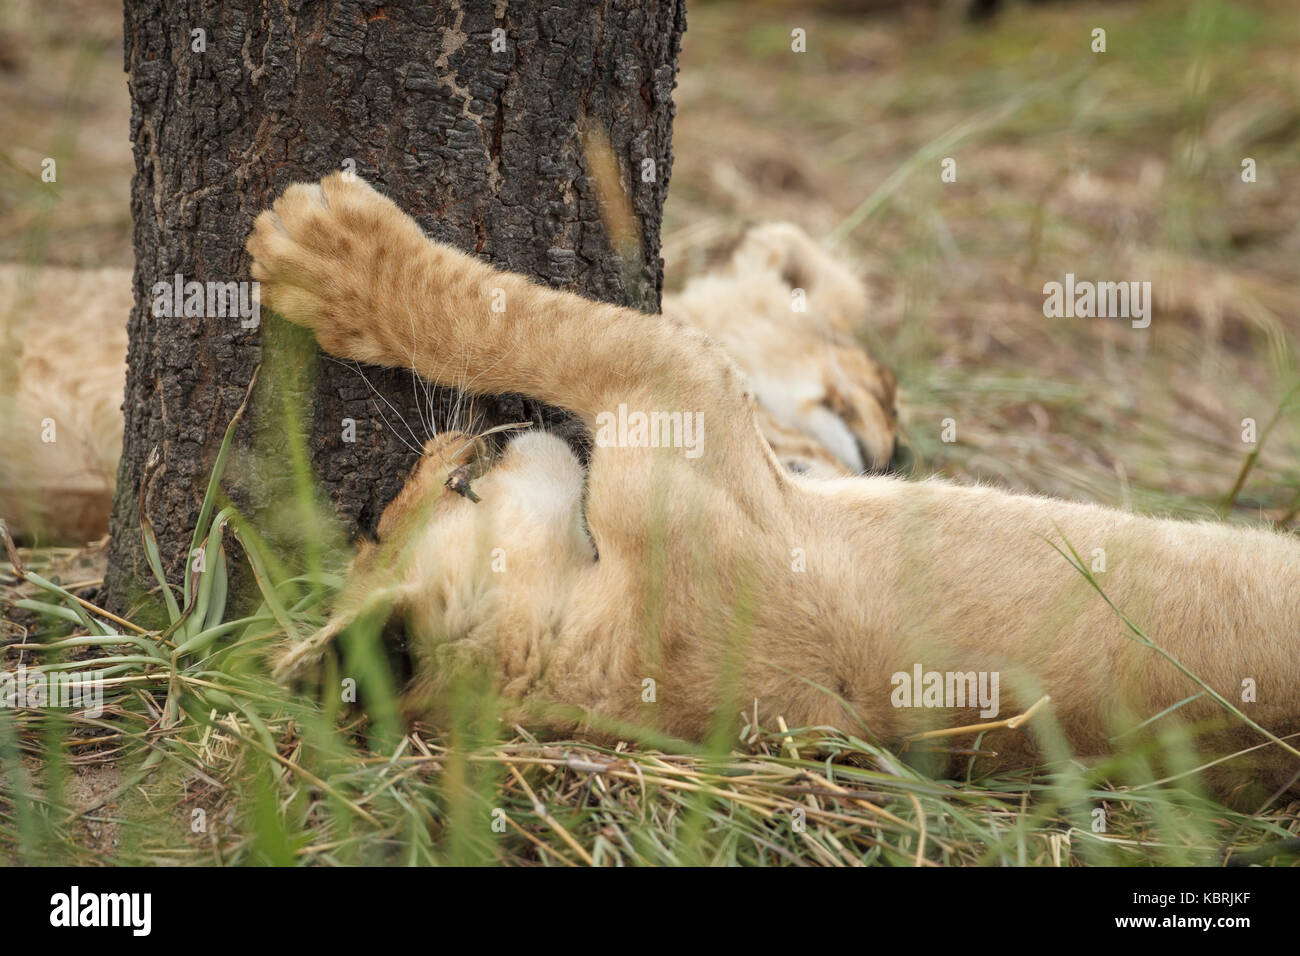 2 lion cubs playing around tree trunk Stock Photo